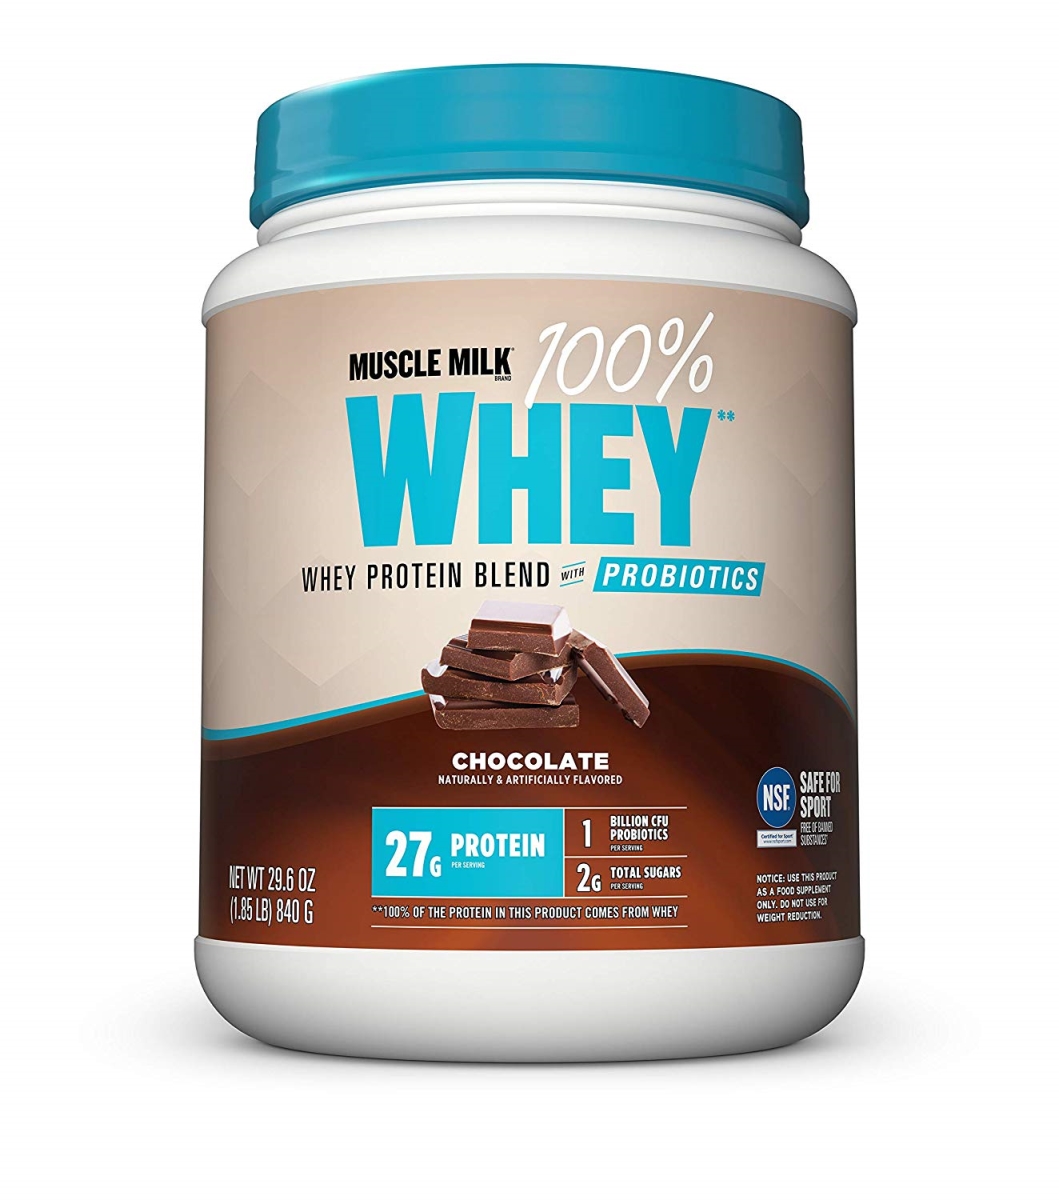 Cytosport 400382 Muscle Milk 100 Percent Whey Protein Powder Blend With Probiotics, Chocolate - 1.85 Lbs